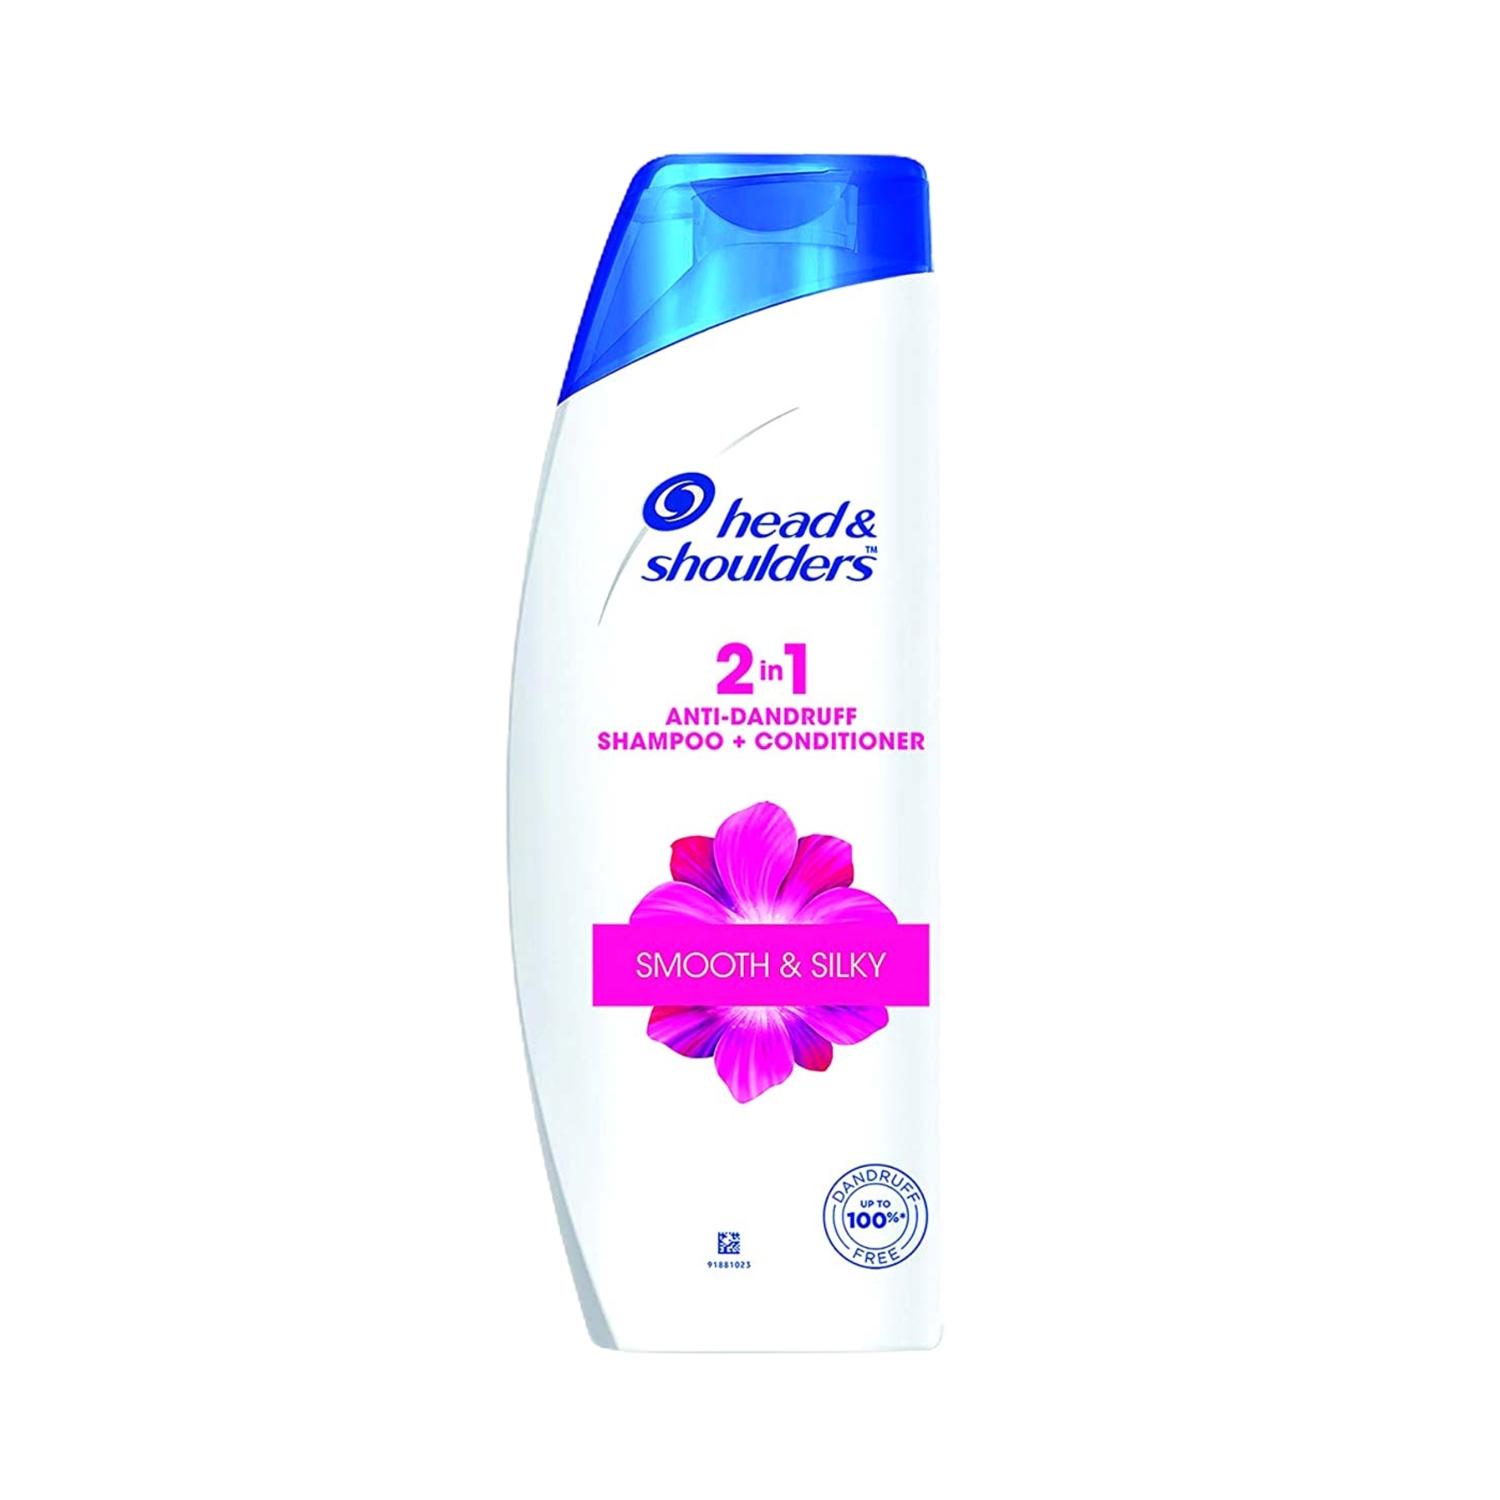 head & shoulders 2-in-1 smooth and silky anti dandruff shampoo + conditioner (340ml)